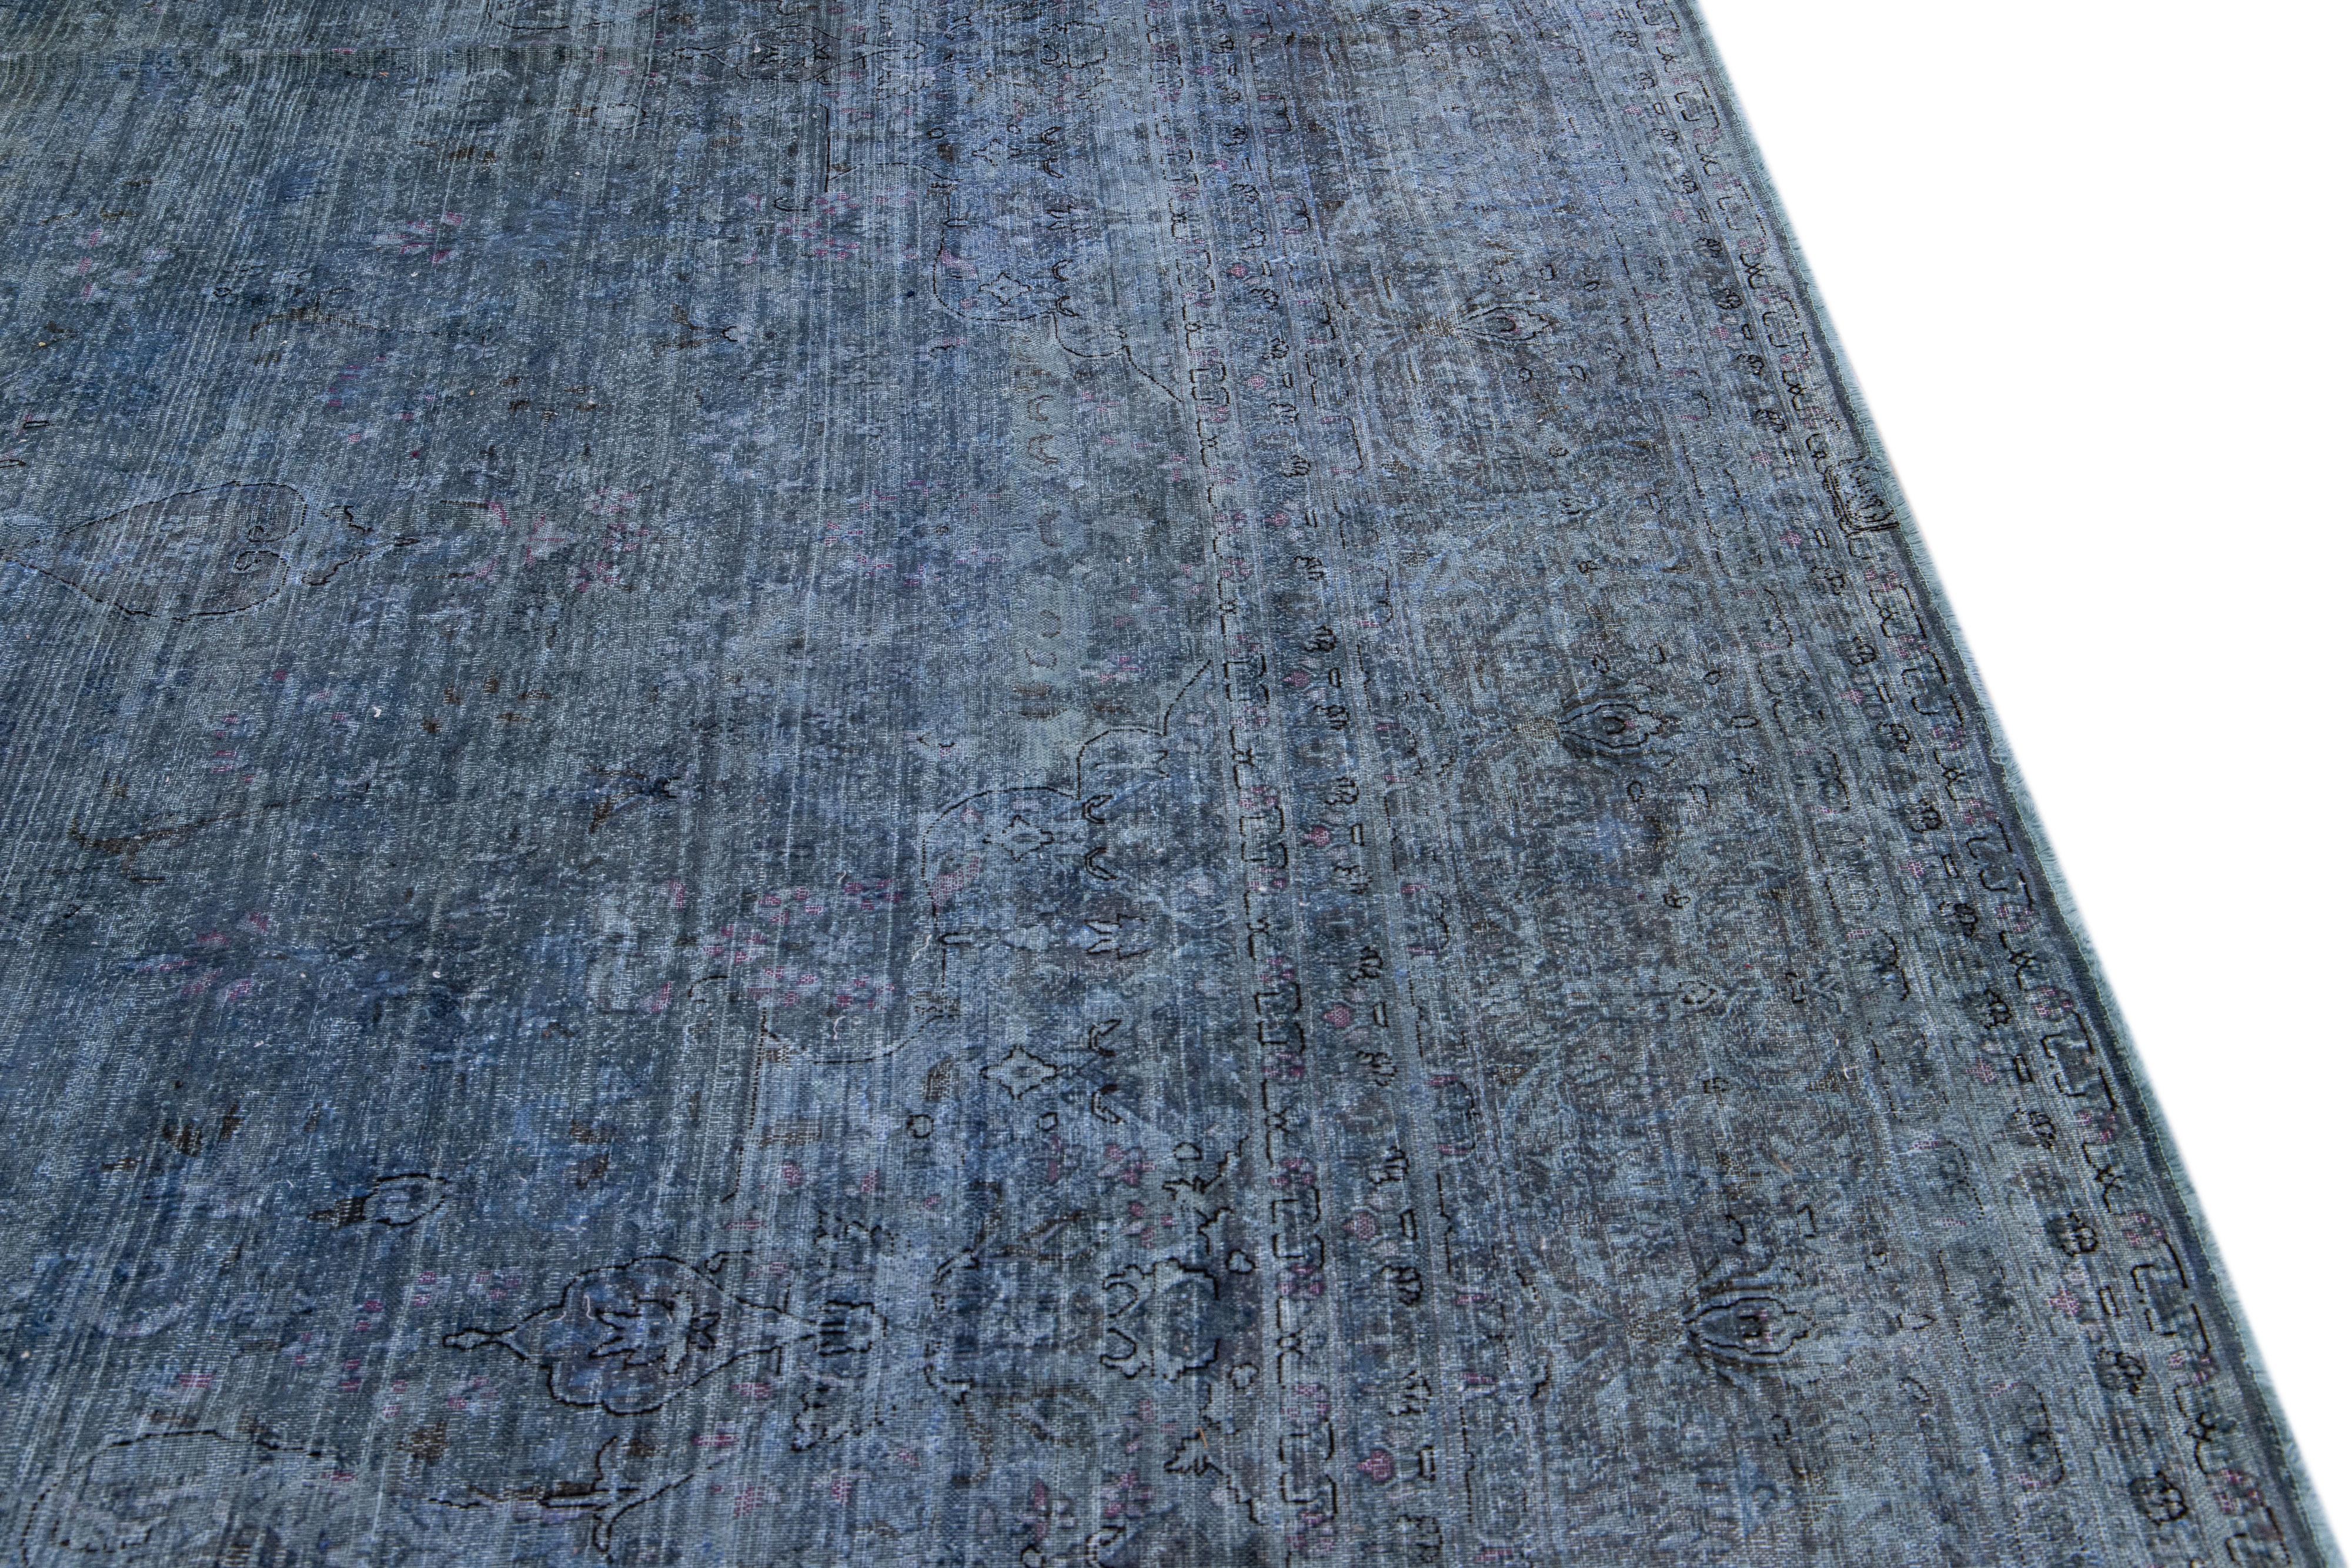 Vintage Persian Overdyed Handmade Blue Wool Rug In Good Condition For Sale In Norwalk, CT